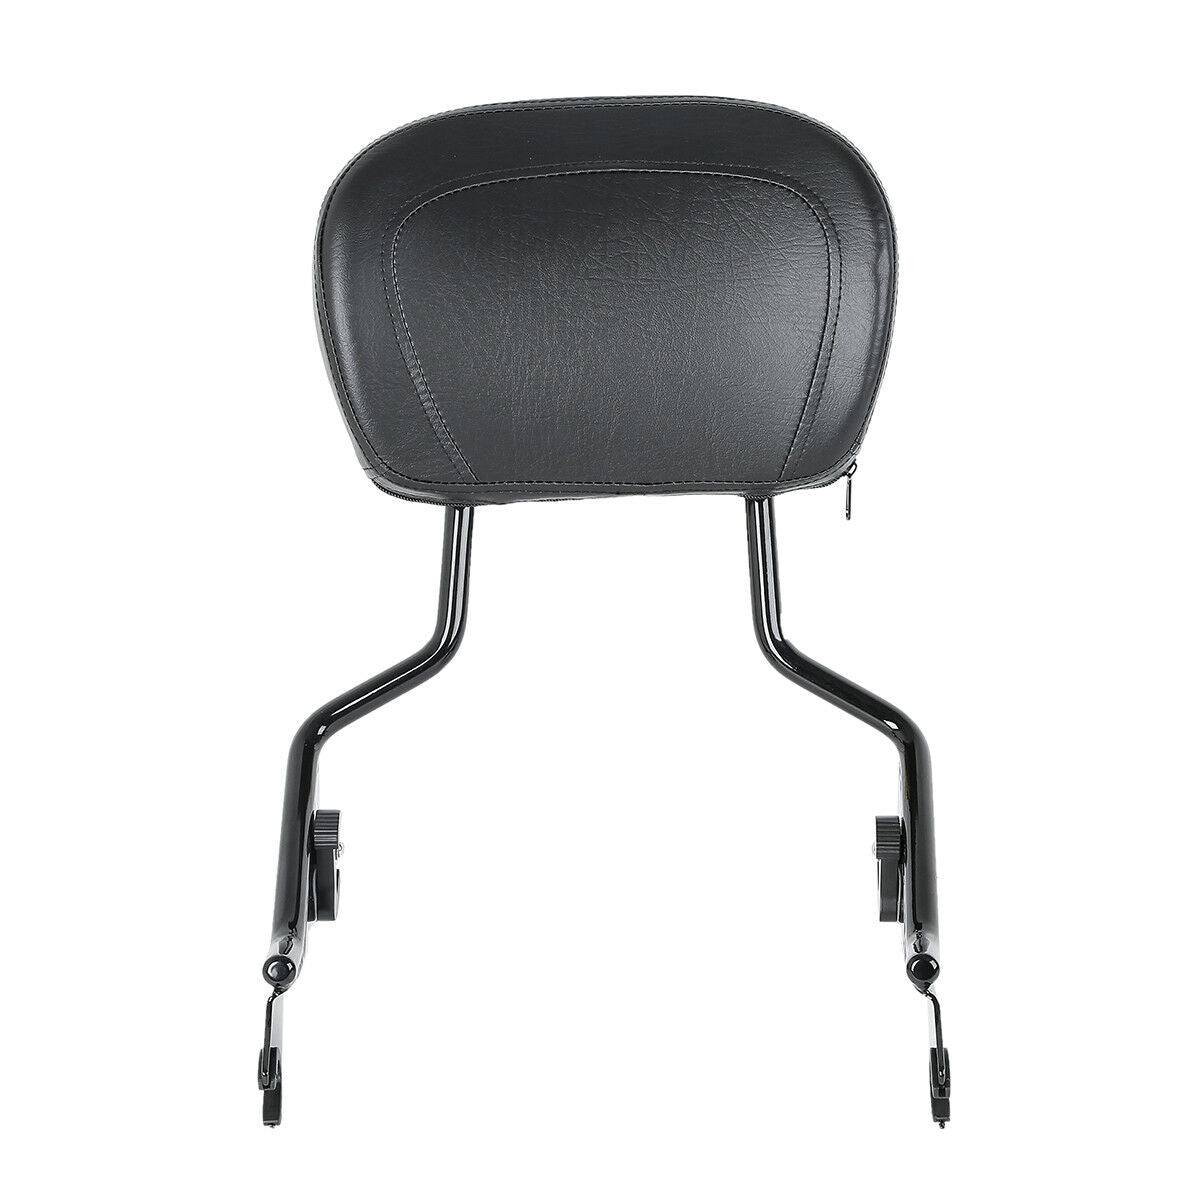 Sissy Bar Passenger Backrest W/ Pad Fit For Harley Street Glide Road Glide 09-21 - Moto Life Products